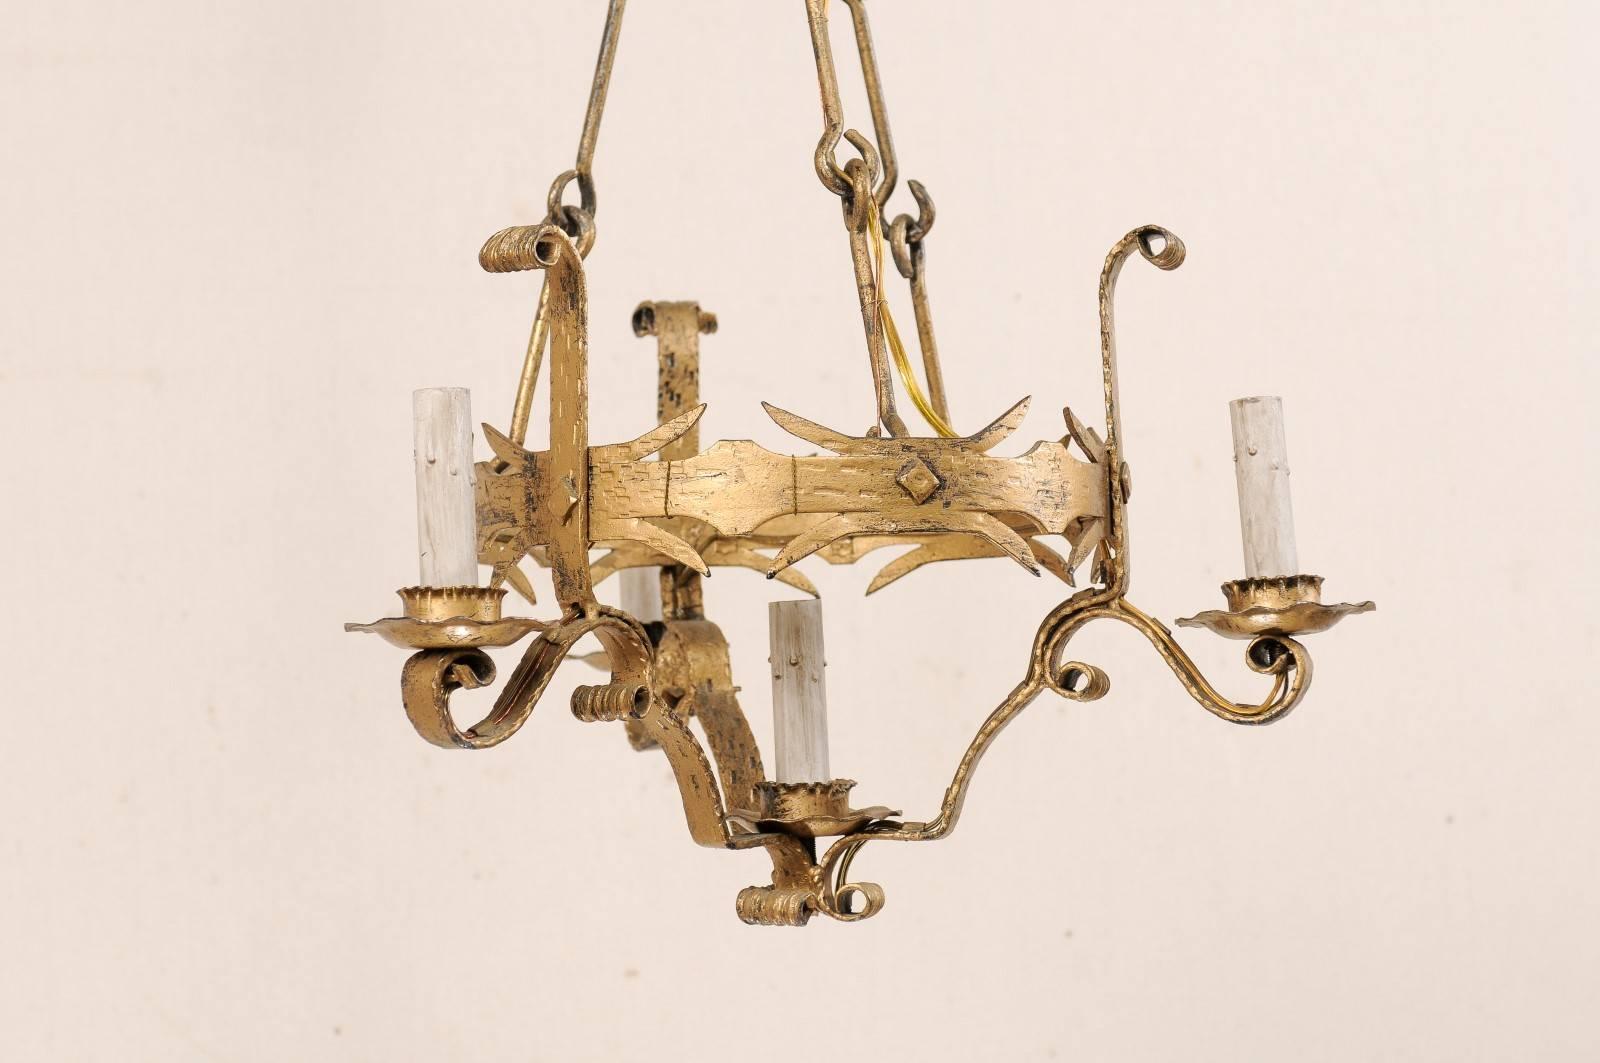 French Mid-20th Century Painted Iron Four-Light Tall Chandelier in Gold (Metall)